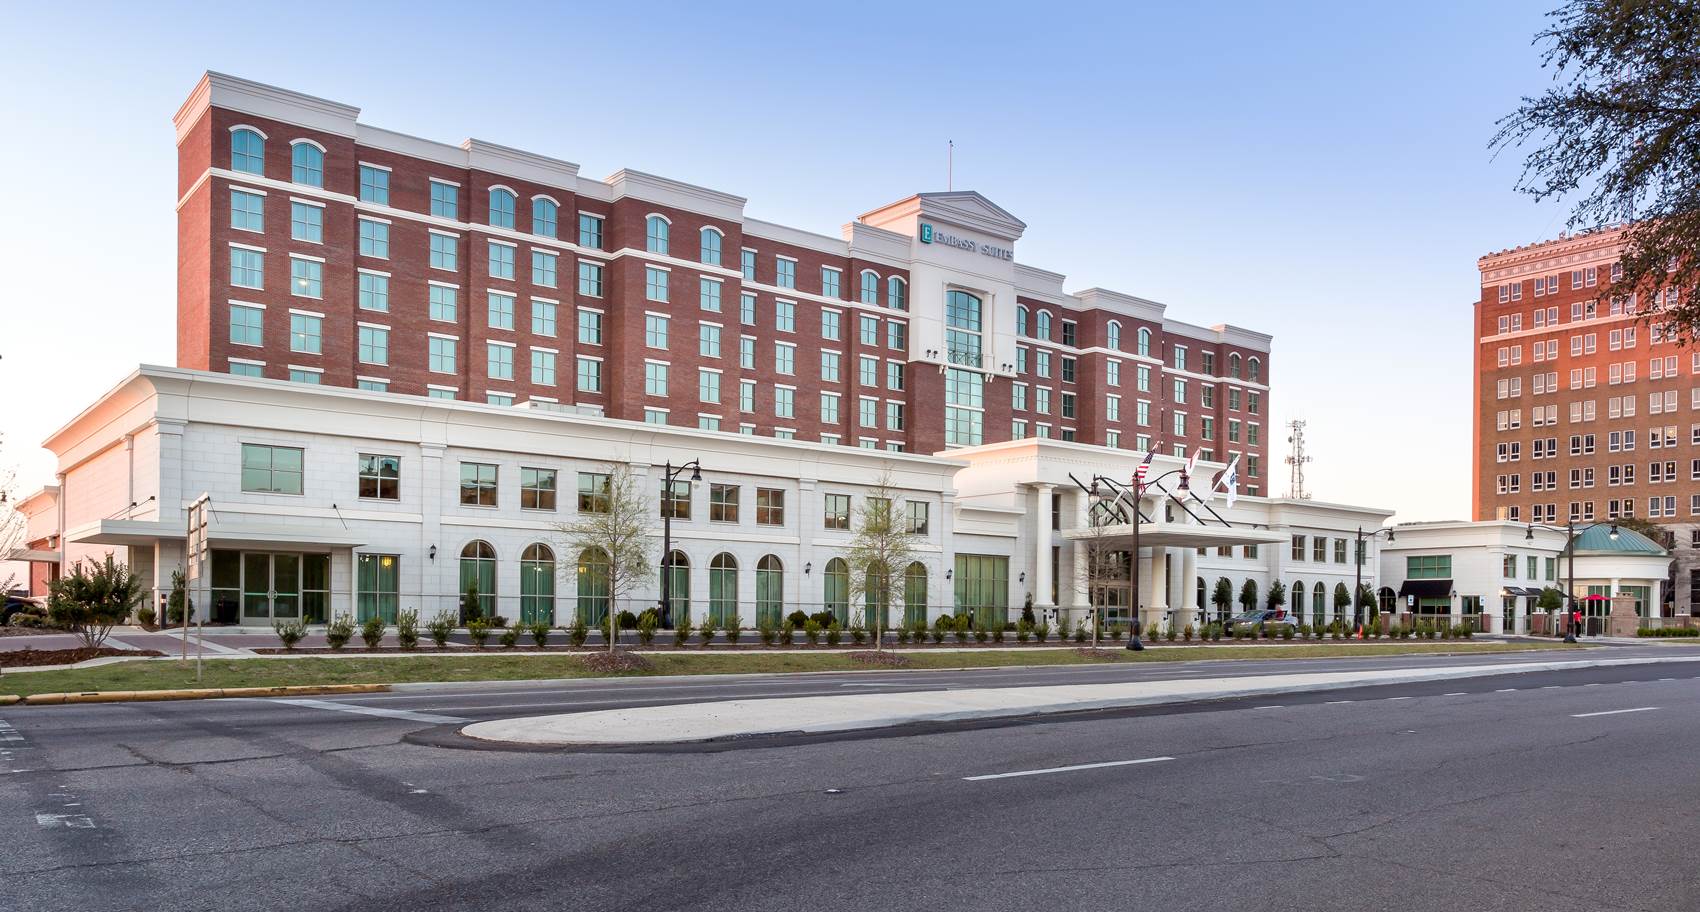 Exterior view of Embassy Suites Hotel in Tuscaloosa